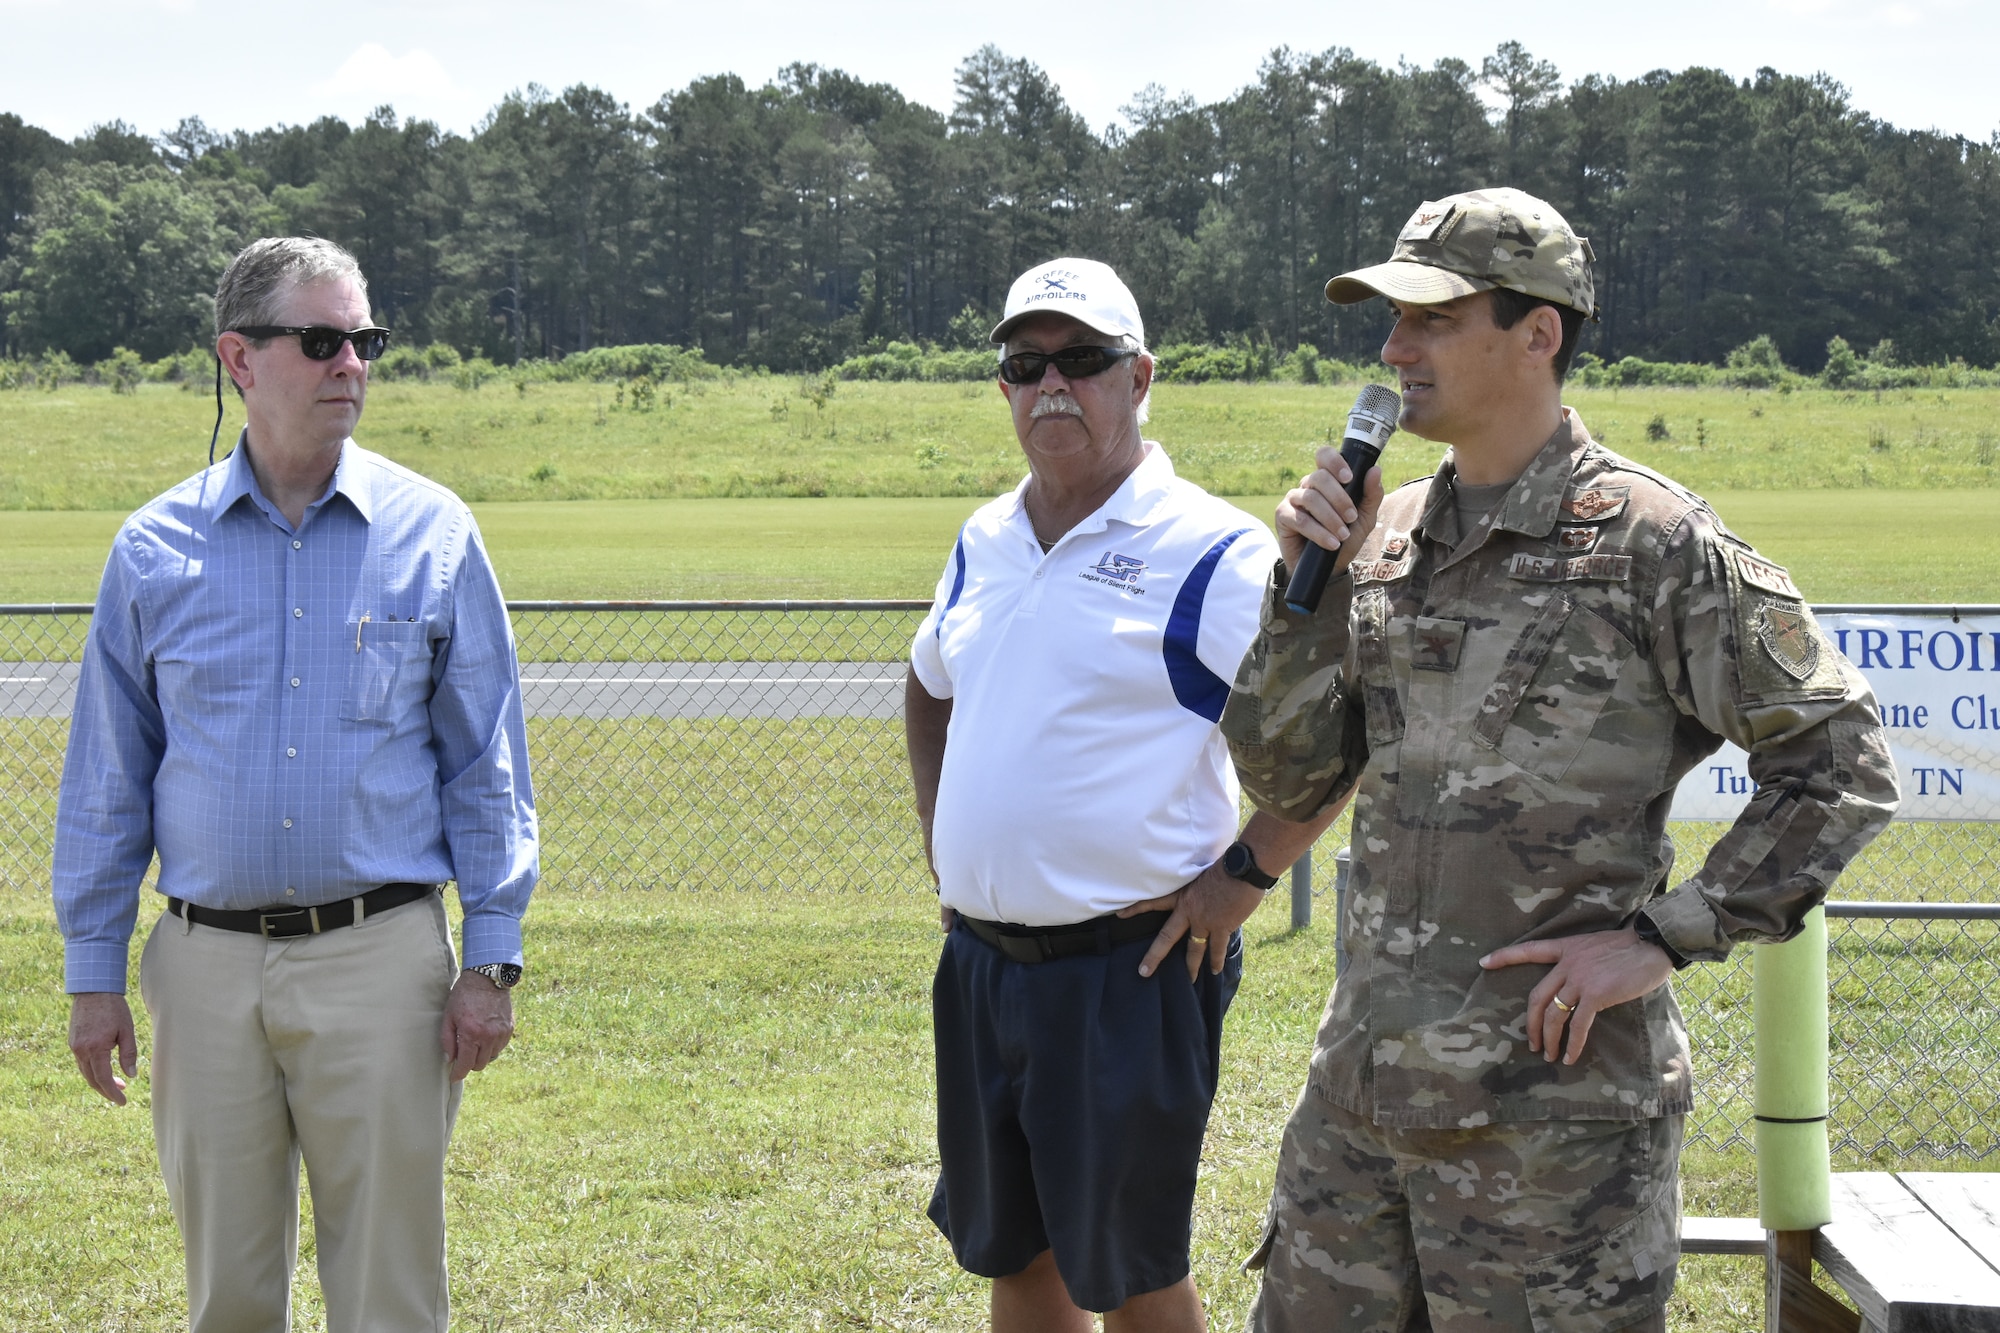 Arnold Engineering Development Complex Commander Col. Jeffrey Geraghty, right, addresses attendees during a June 26, 2021, event hosted by the Coffee Airfoilers Model RC Club to coincide with the Arnold Engineering Development Complex 70th anniversary celebration. Also pictured is Coffee Airfoilers Club President Don Cleveland, center, and AEDC Vice Director Jason Coker. Youth participating in the event were tasked with assembling small balsa wood airplanes, with top prizes going to those whose planes flew the farthest from the launch line. (U.S. Air Force photo by Bradley Hicks)